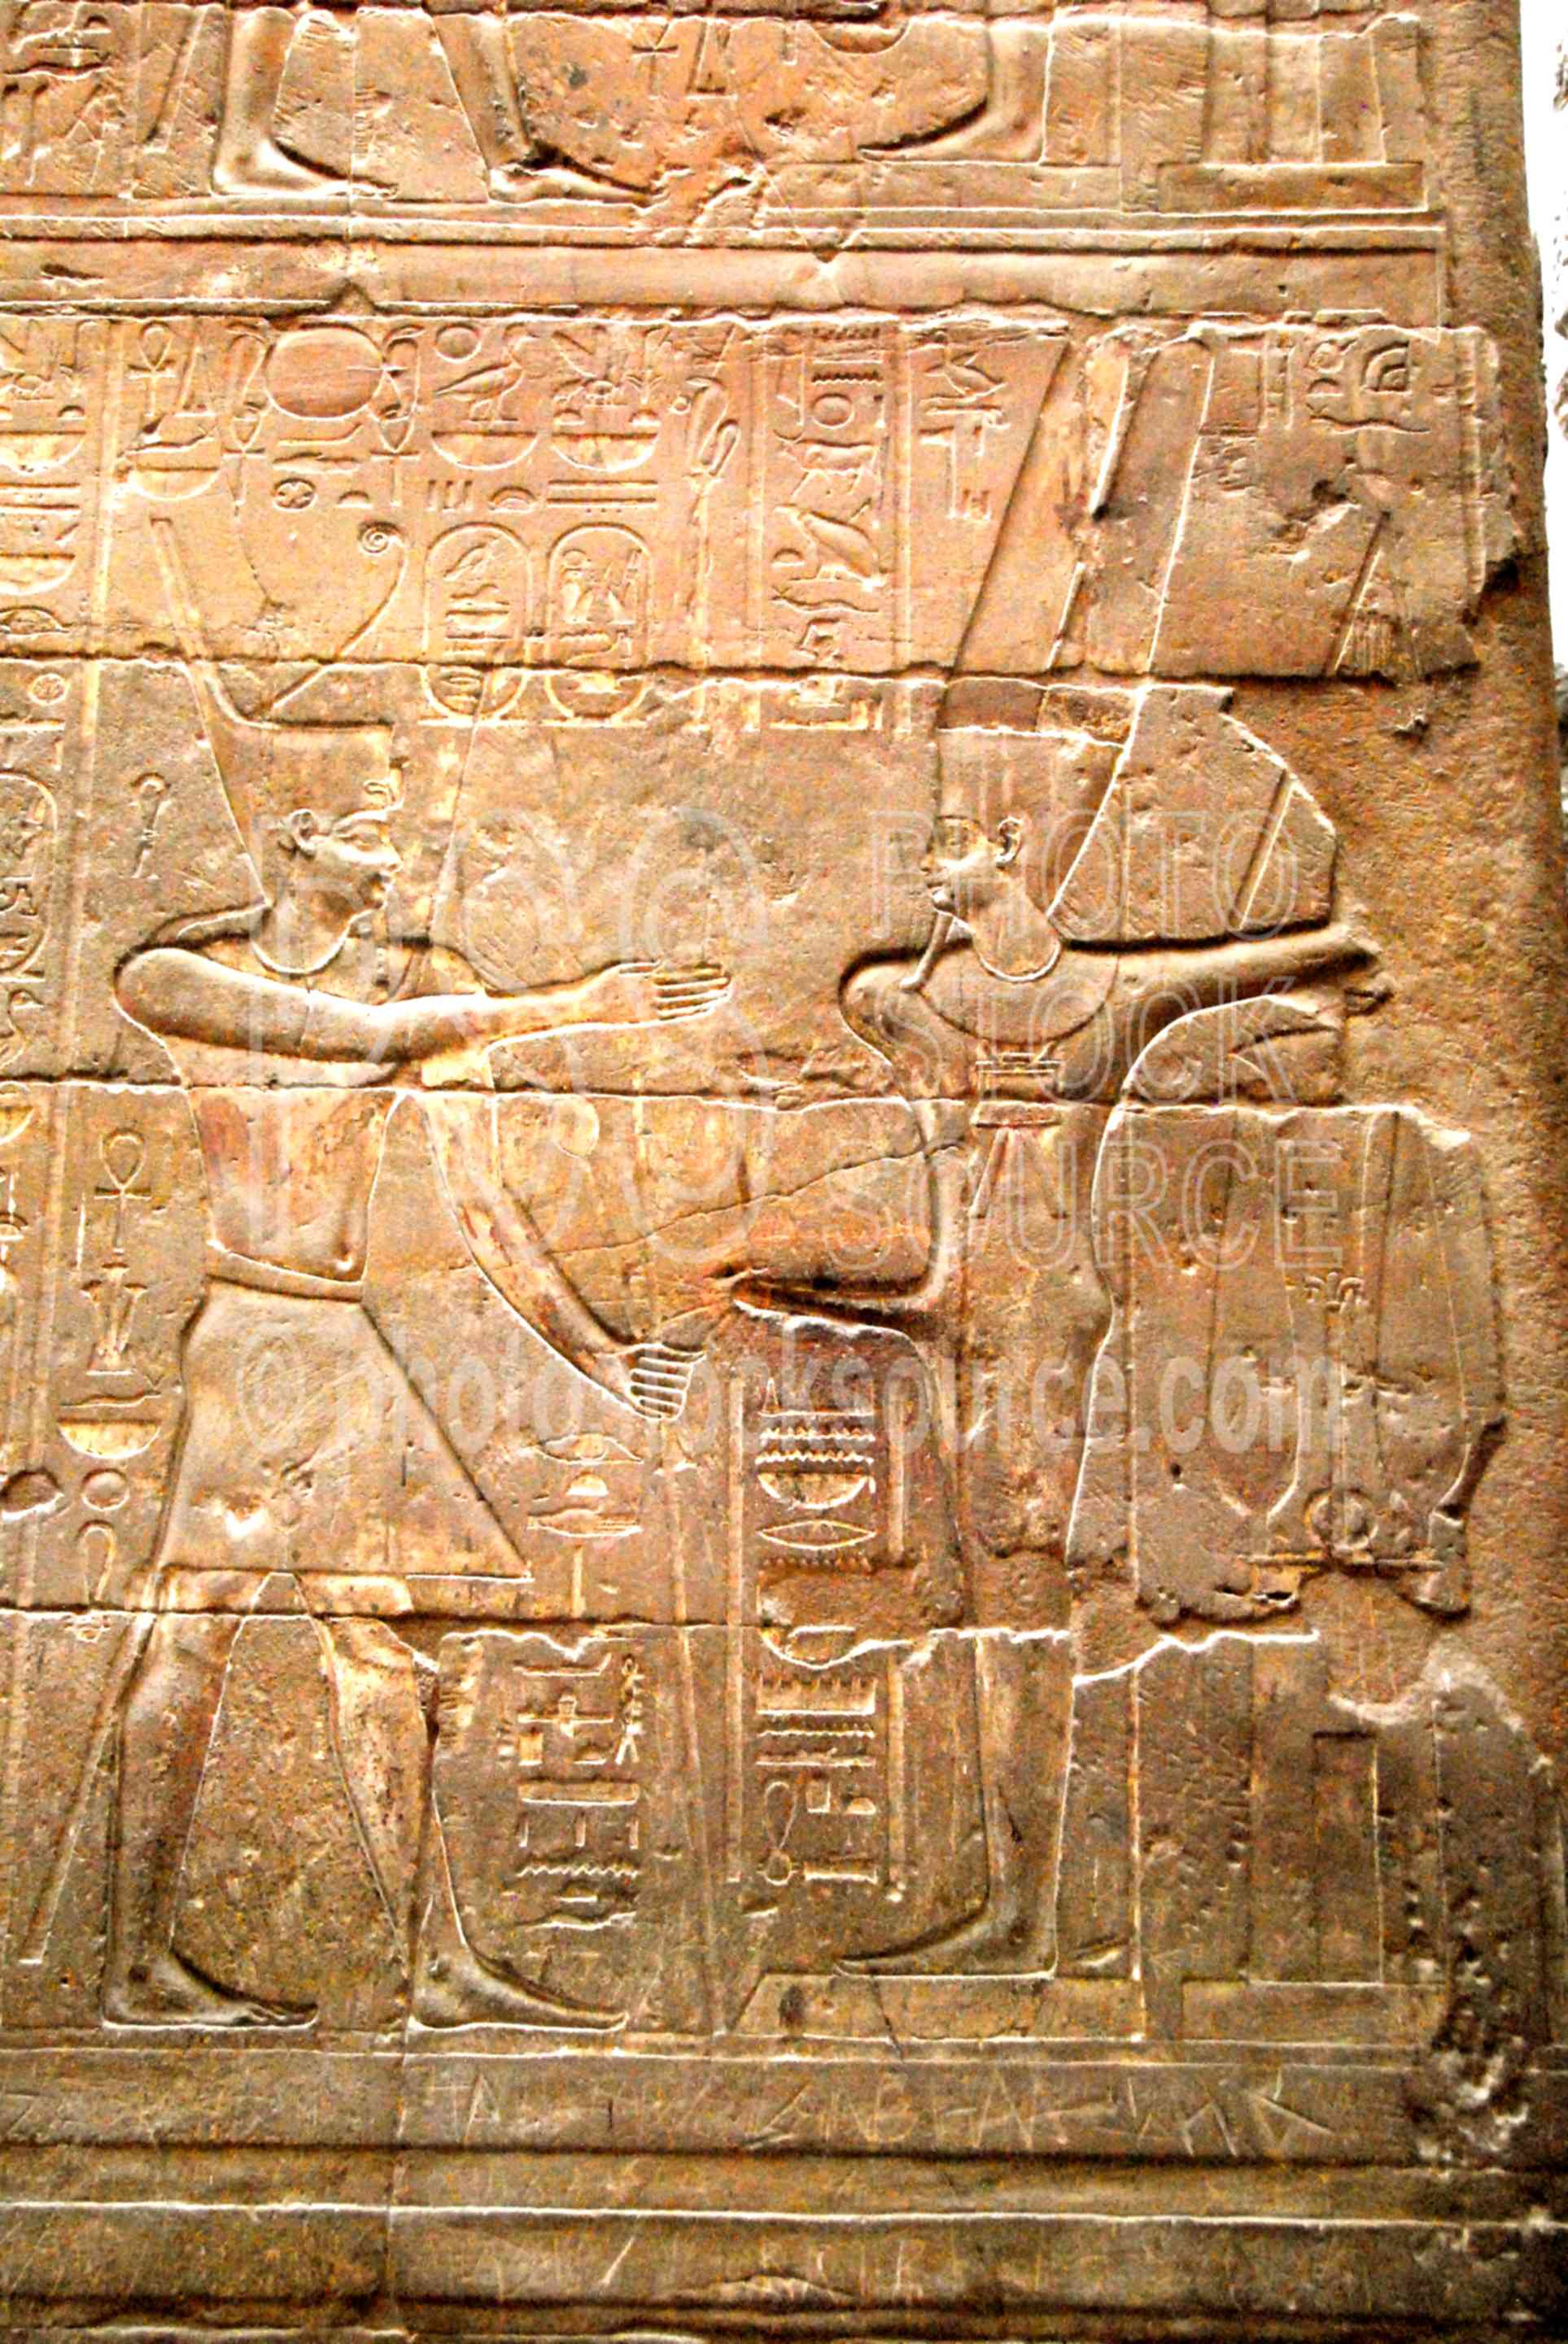 Wall Reliefs of Prowess,temple,columns,amun,penis,erect,prowess,reliefs,hieroglyphics,architecture,temples